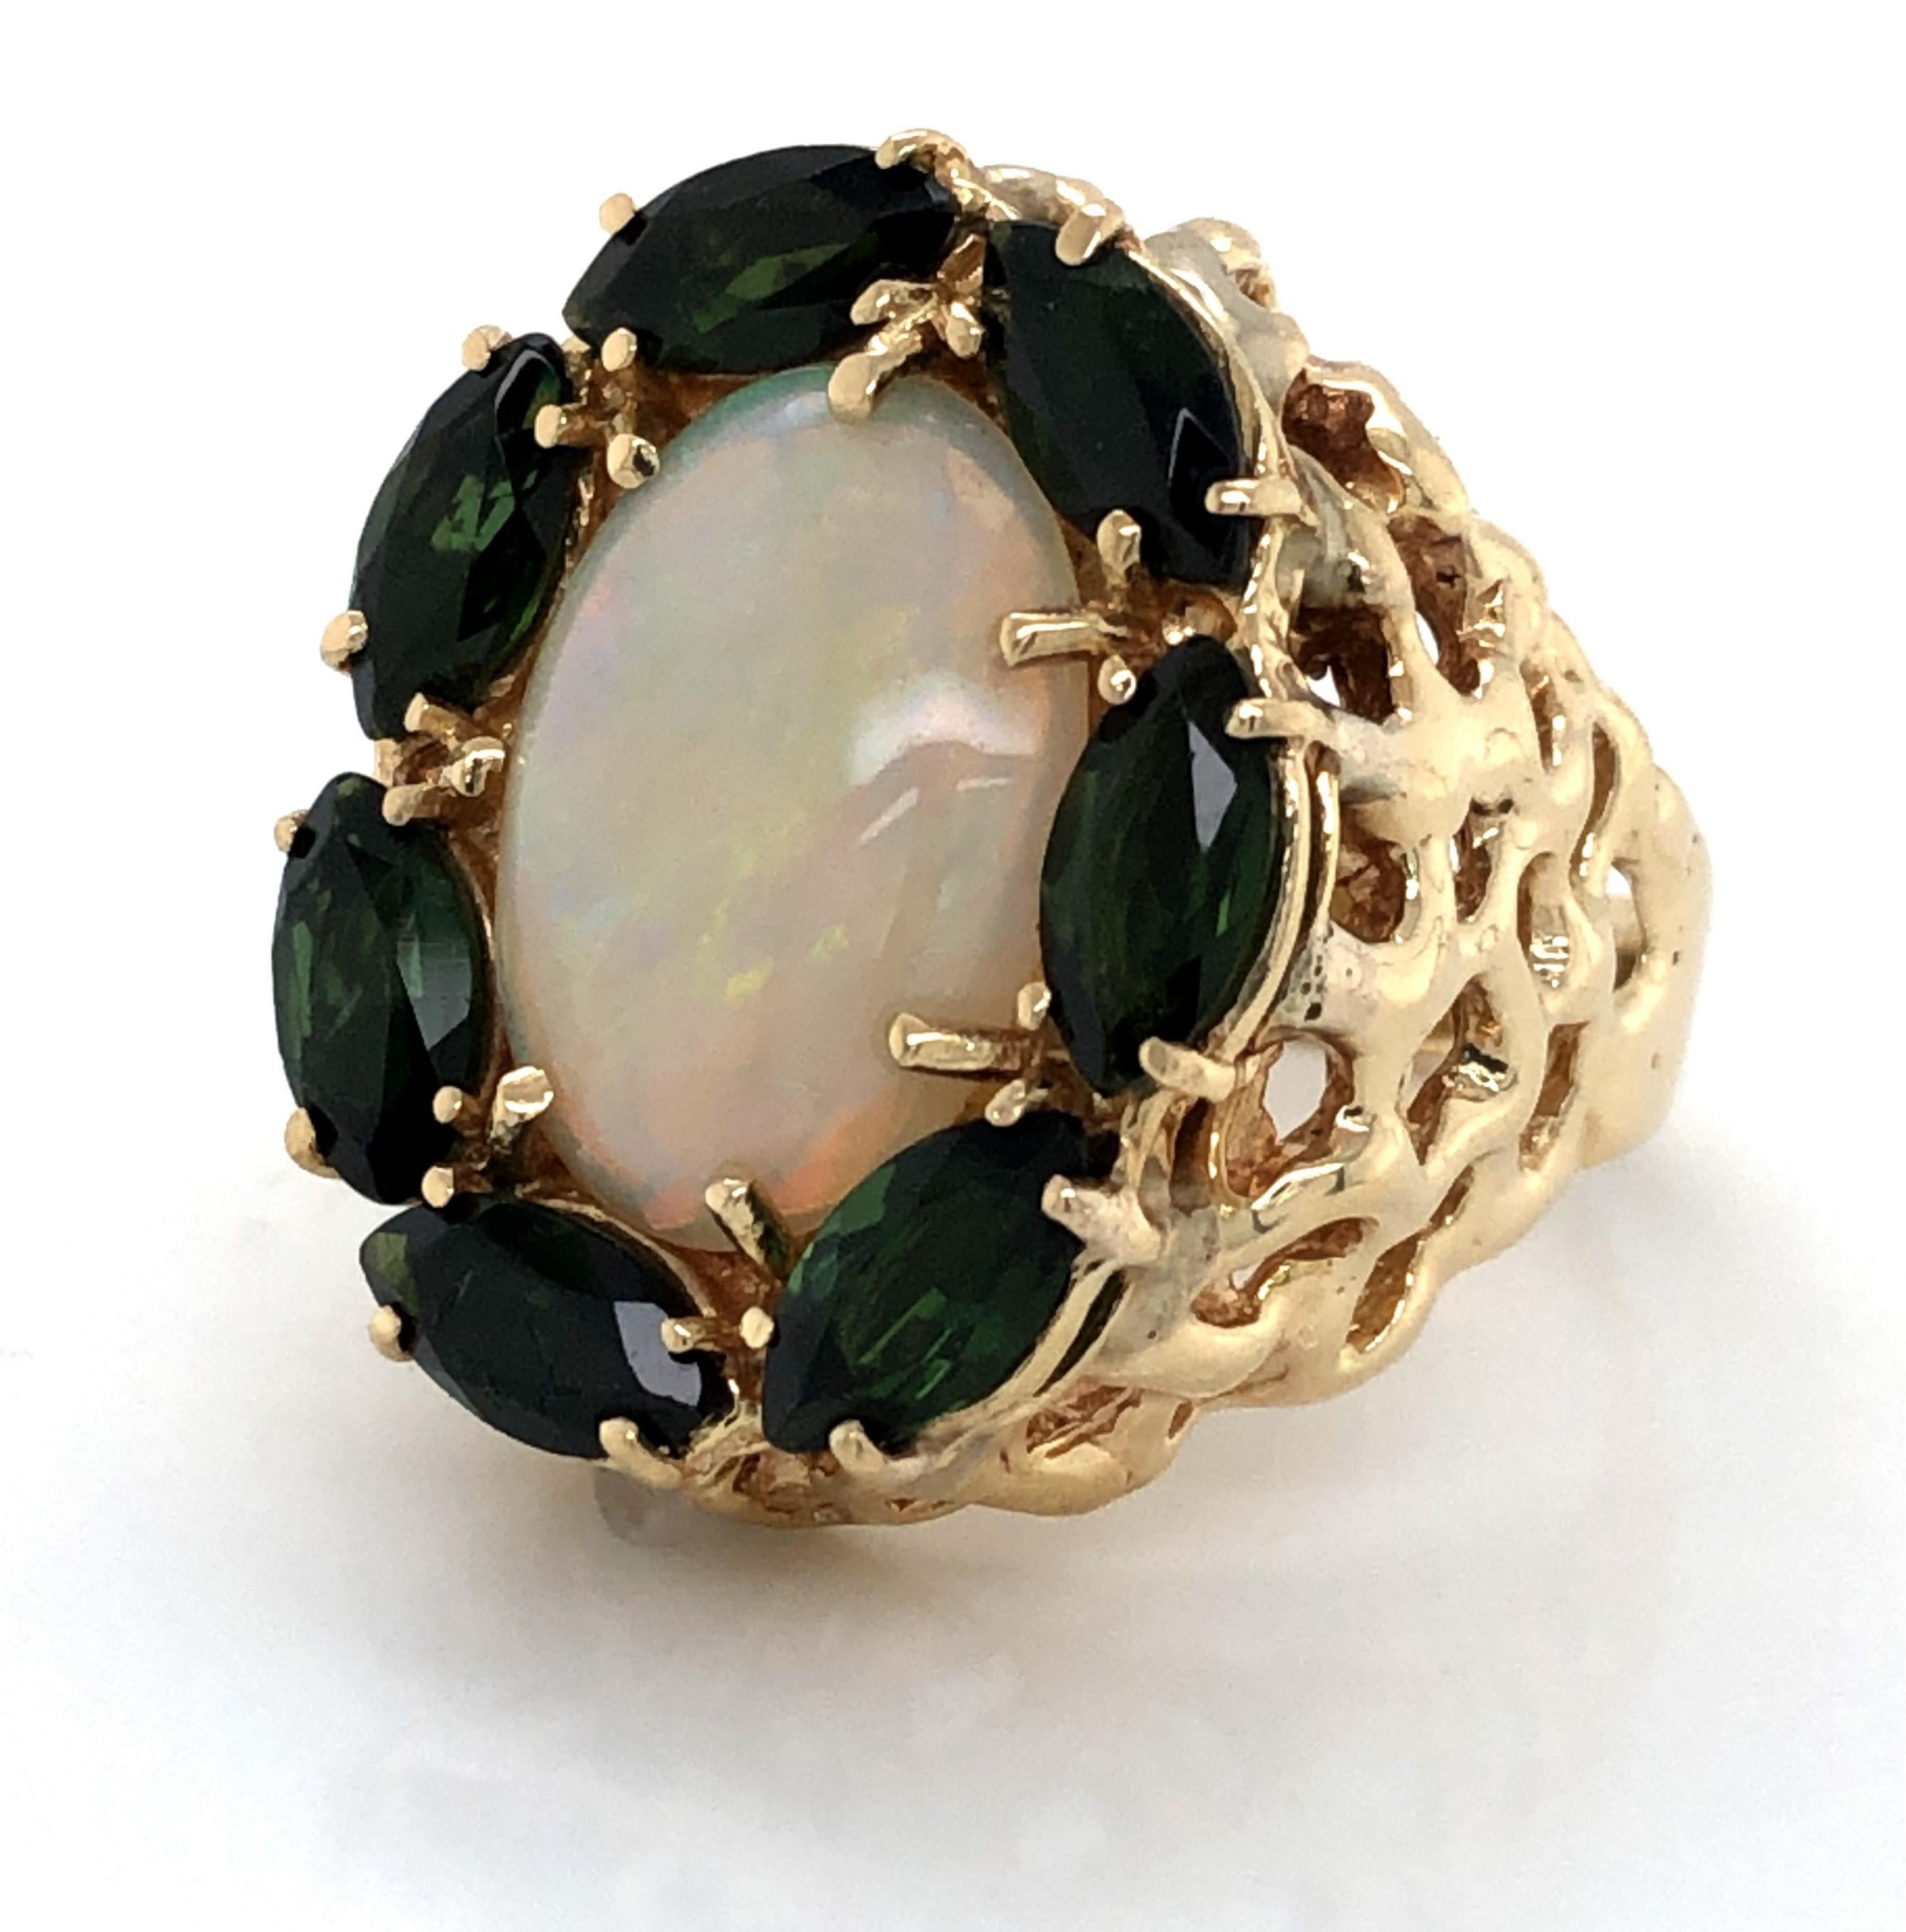 Seven rich green faceted marquise cut peridot stones, two carat total weight, dance around the large featured 17mm x 13mm oval iridescent opal cabochon that is the focal point of this statement ring. A substantial basket weave inspired ring shoulder